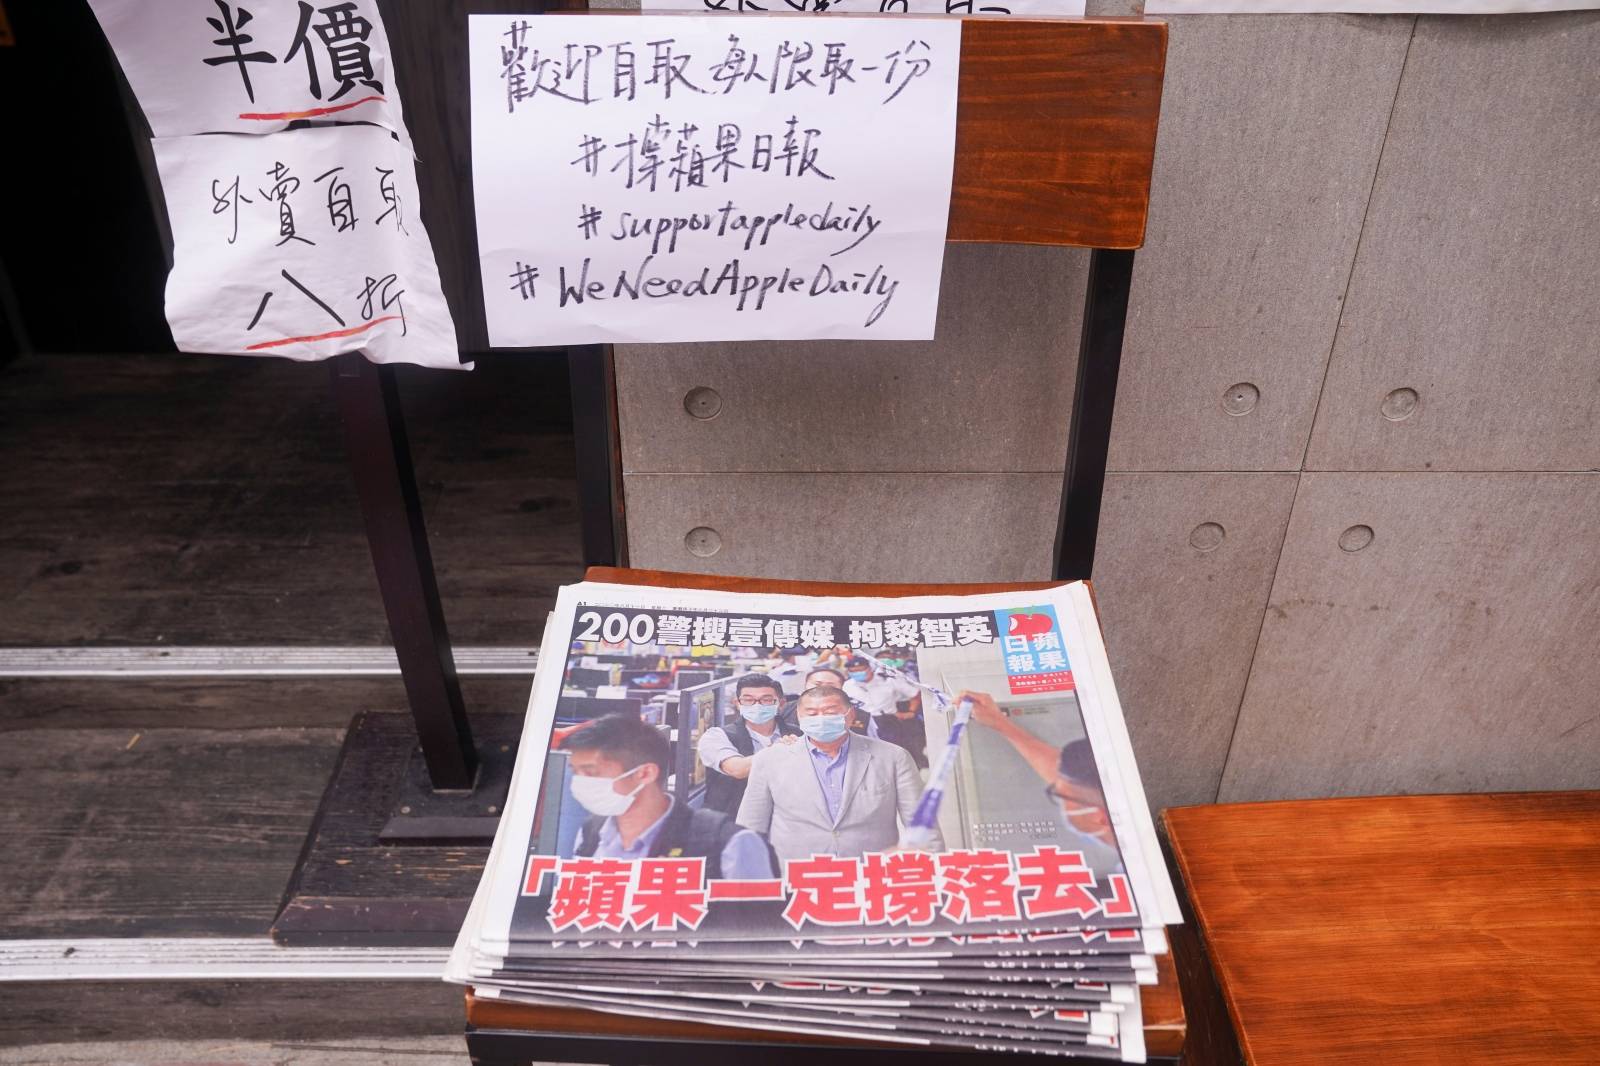 Copies of the Apple Daily newspaper with the headline "Apple Daily will fight on", are seen outside a restaurant in Hong Kong